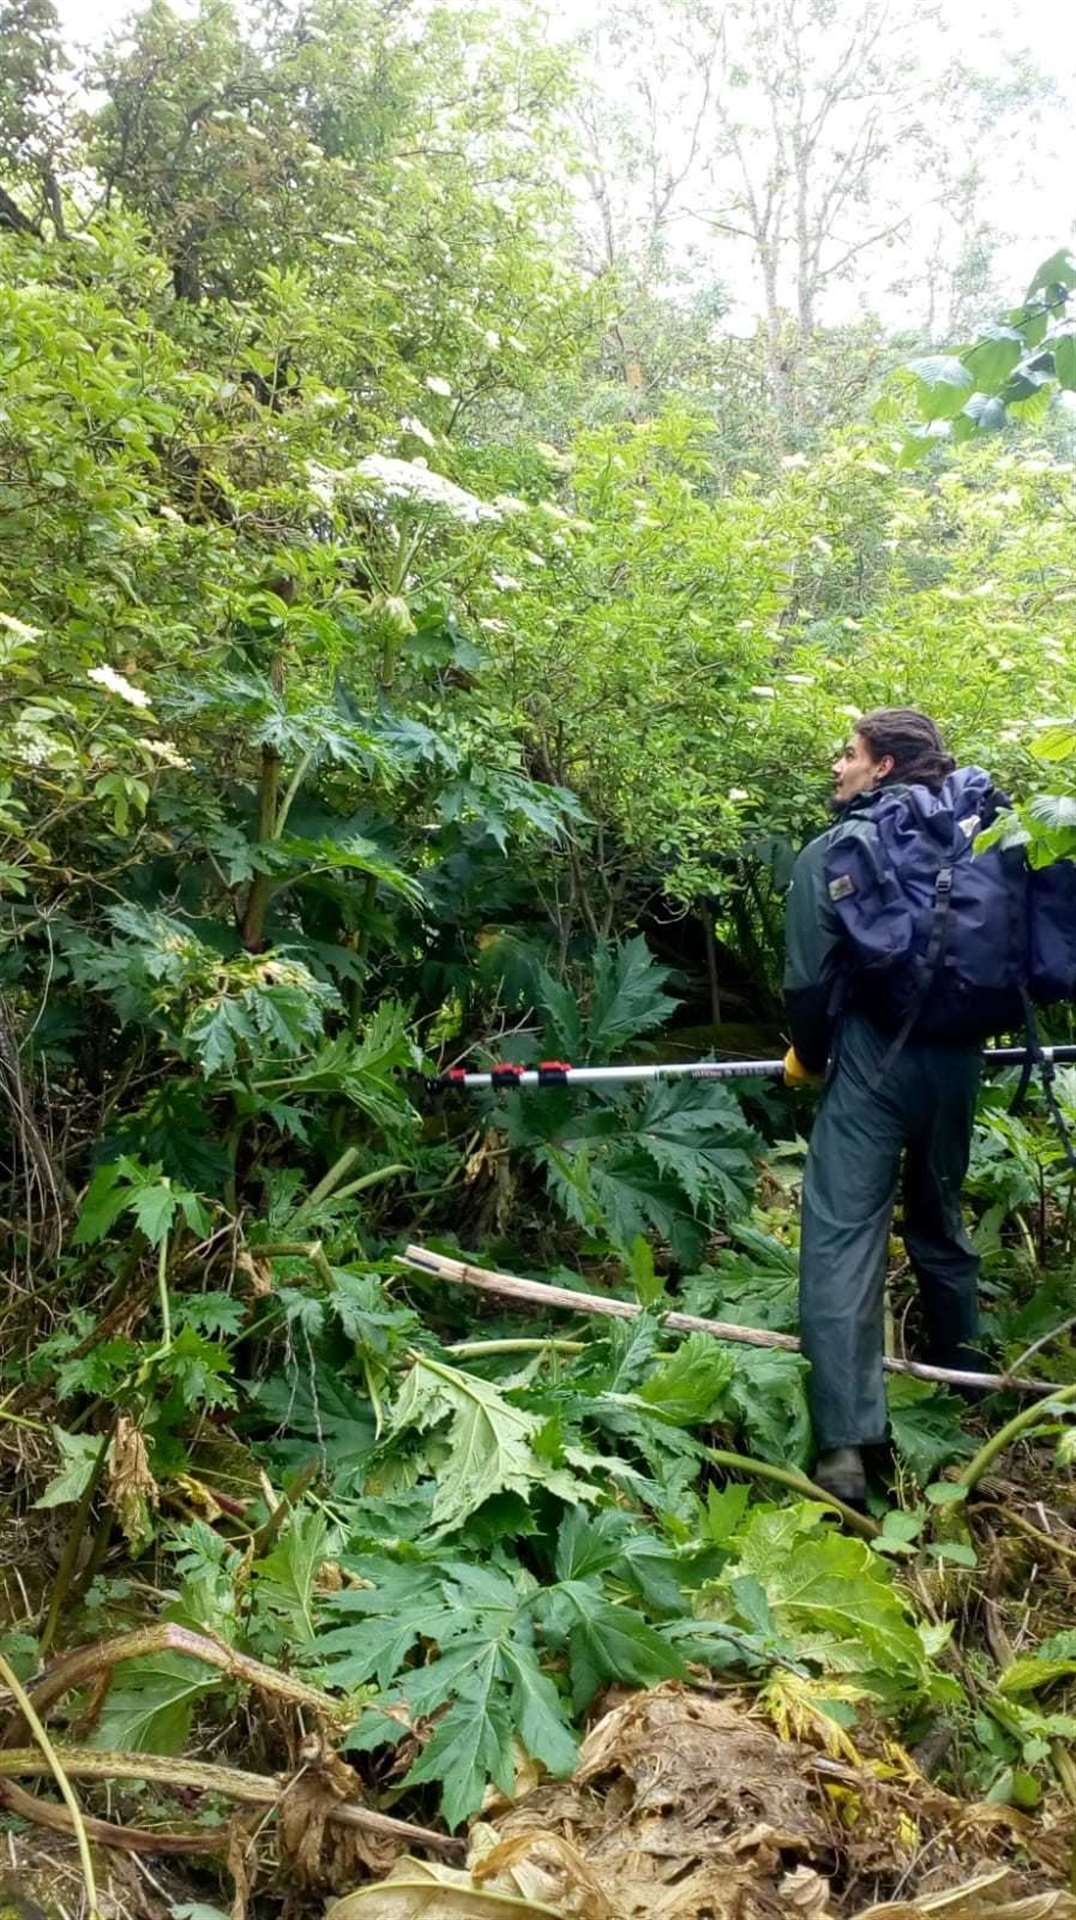 Wild Things instructor Joshua Smith facing down a wall of Giant Hogweed.